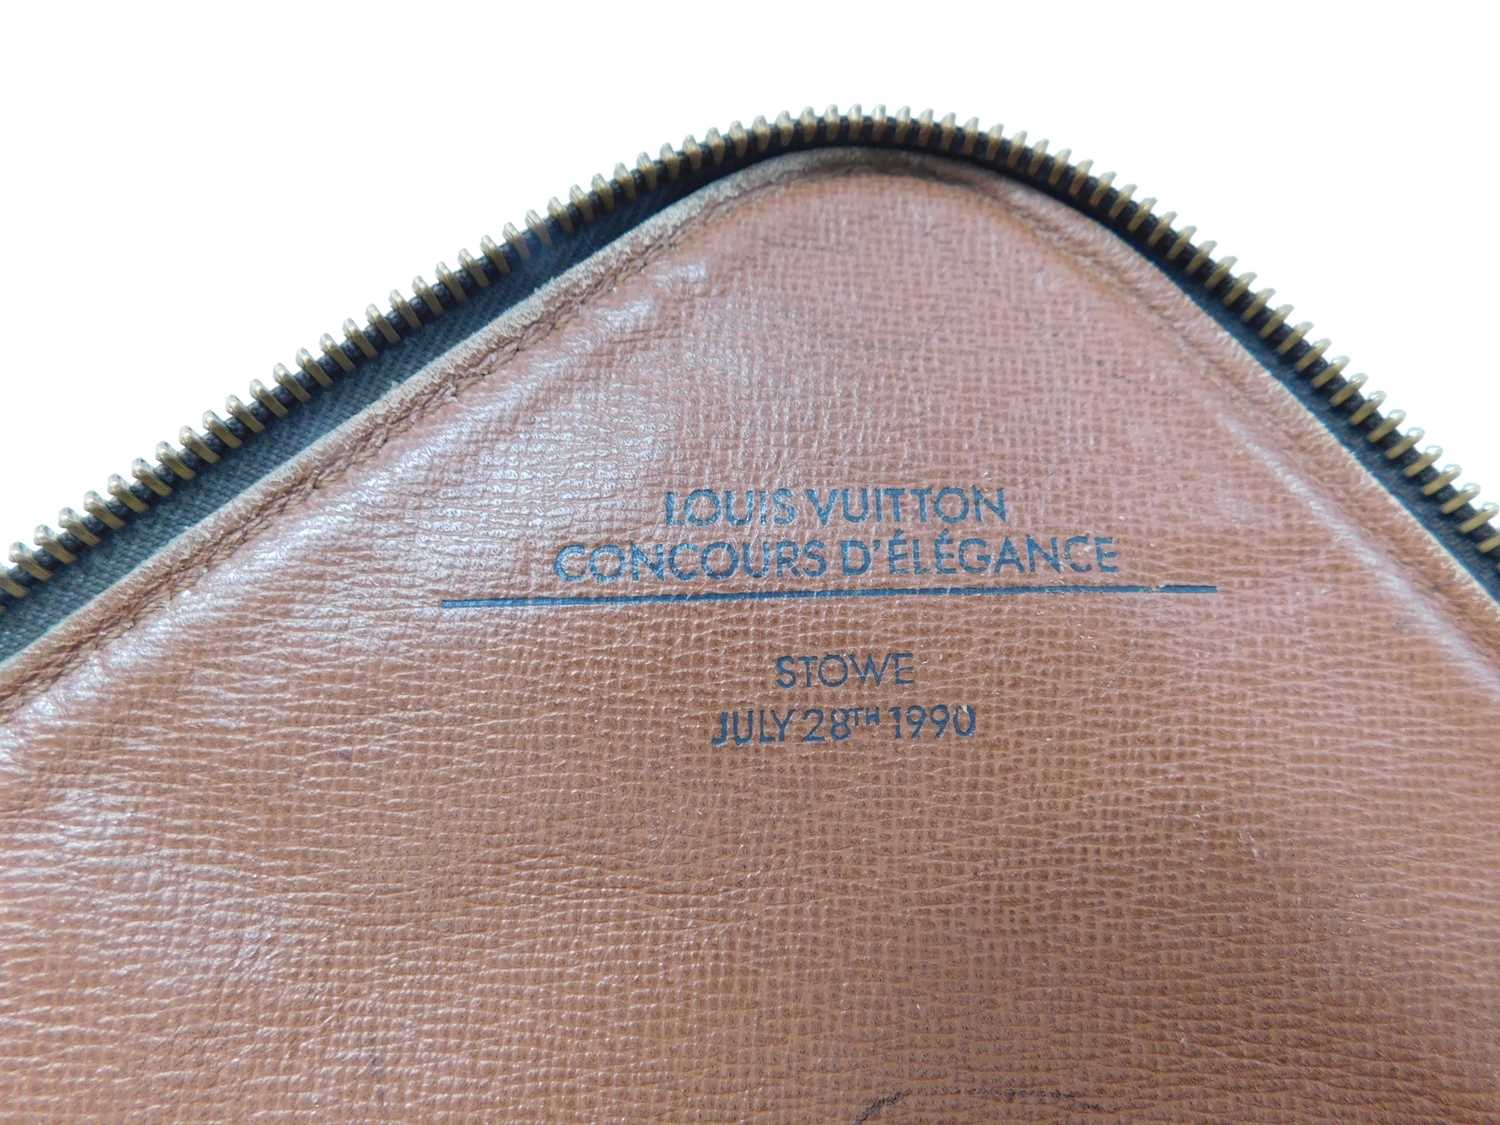 A Louis Vuitton travel sleeve / laptop case for The Concours D'Elegance, Stowe, July 28th 1990, - Image 2 of 4